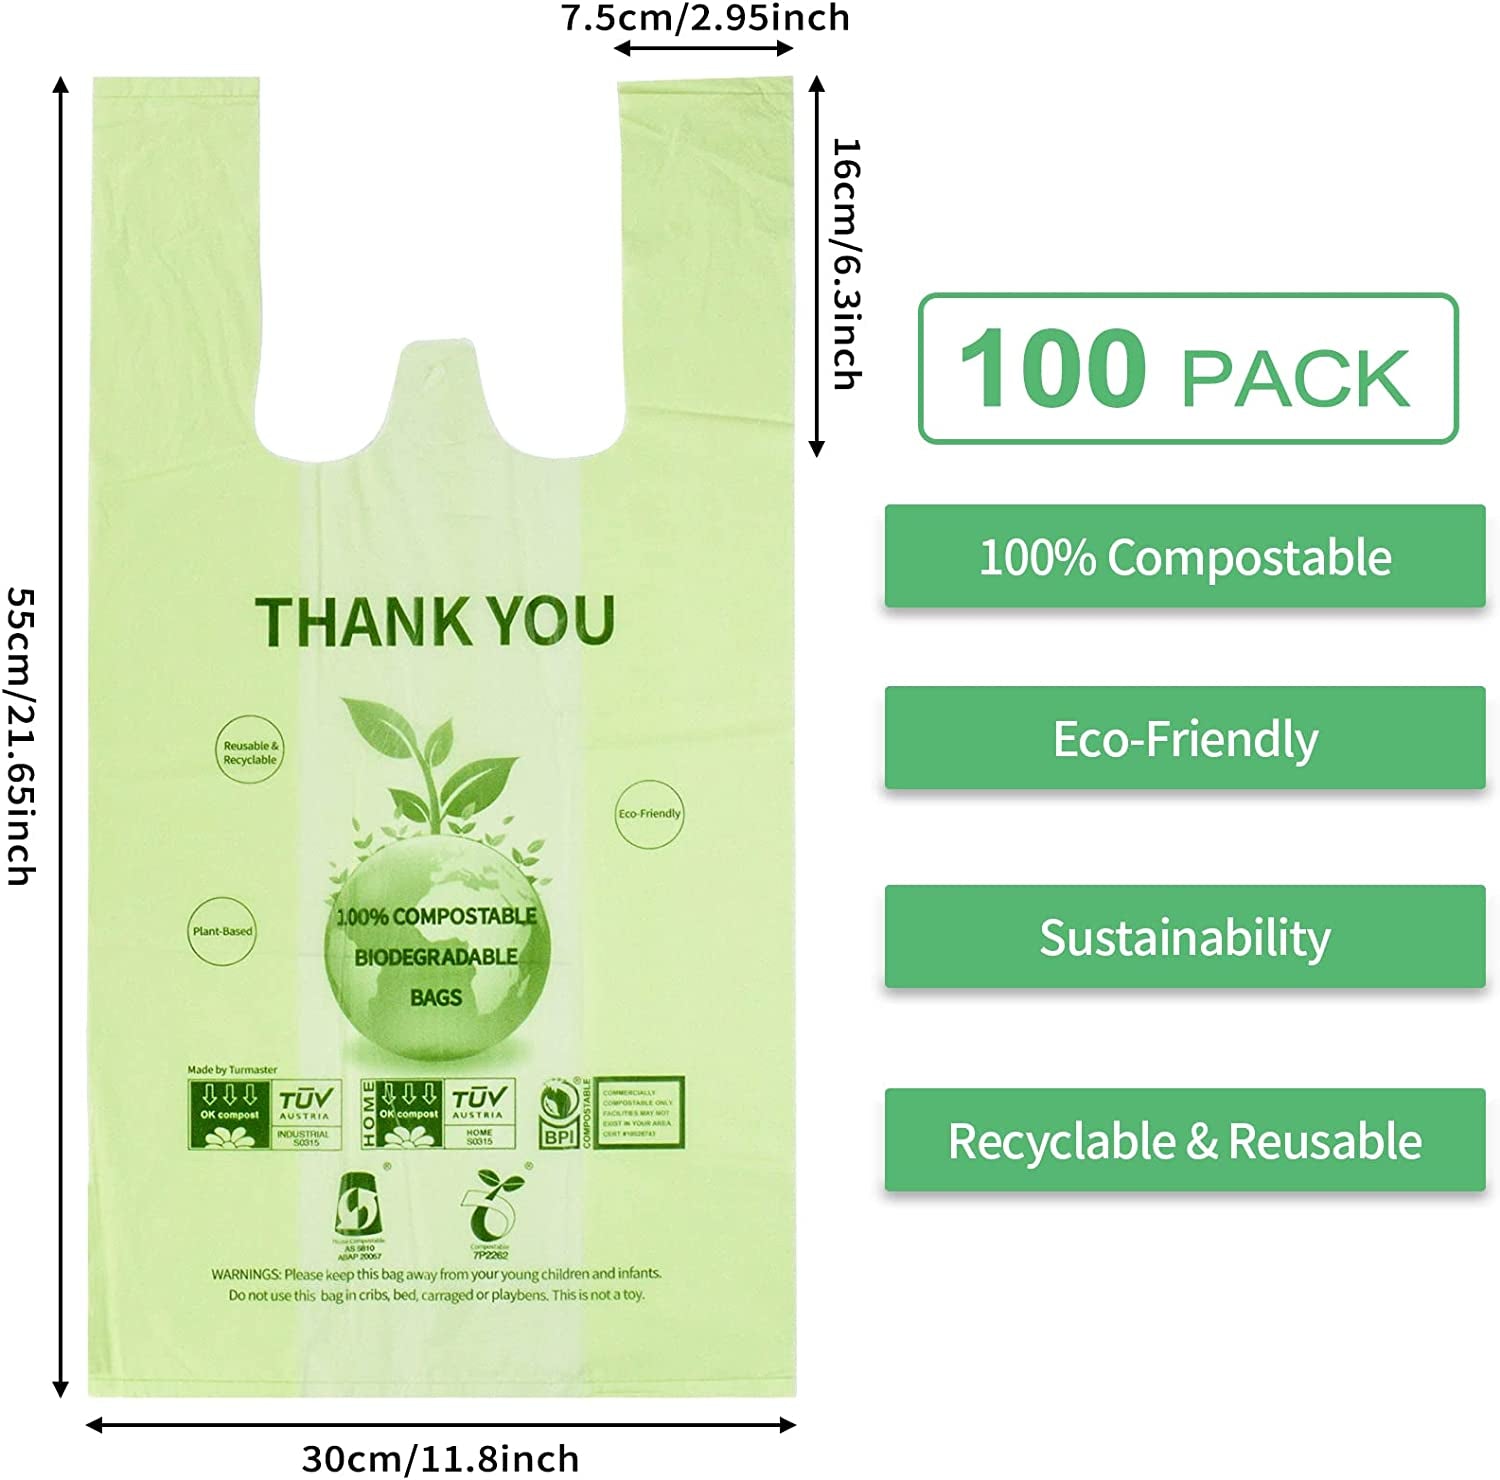 Eco-friendly and biodegradable grocery bags